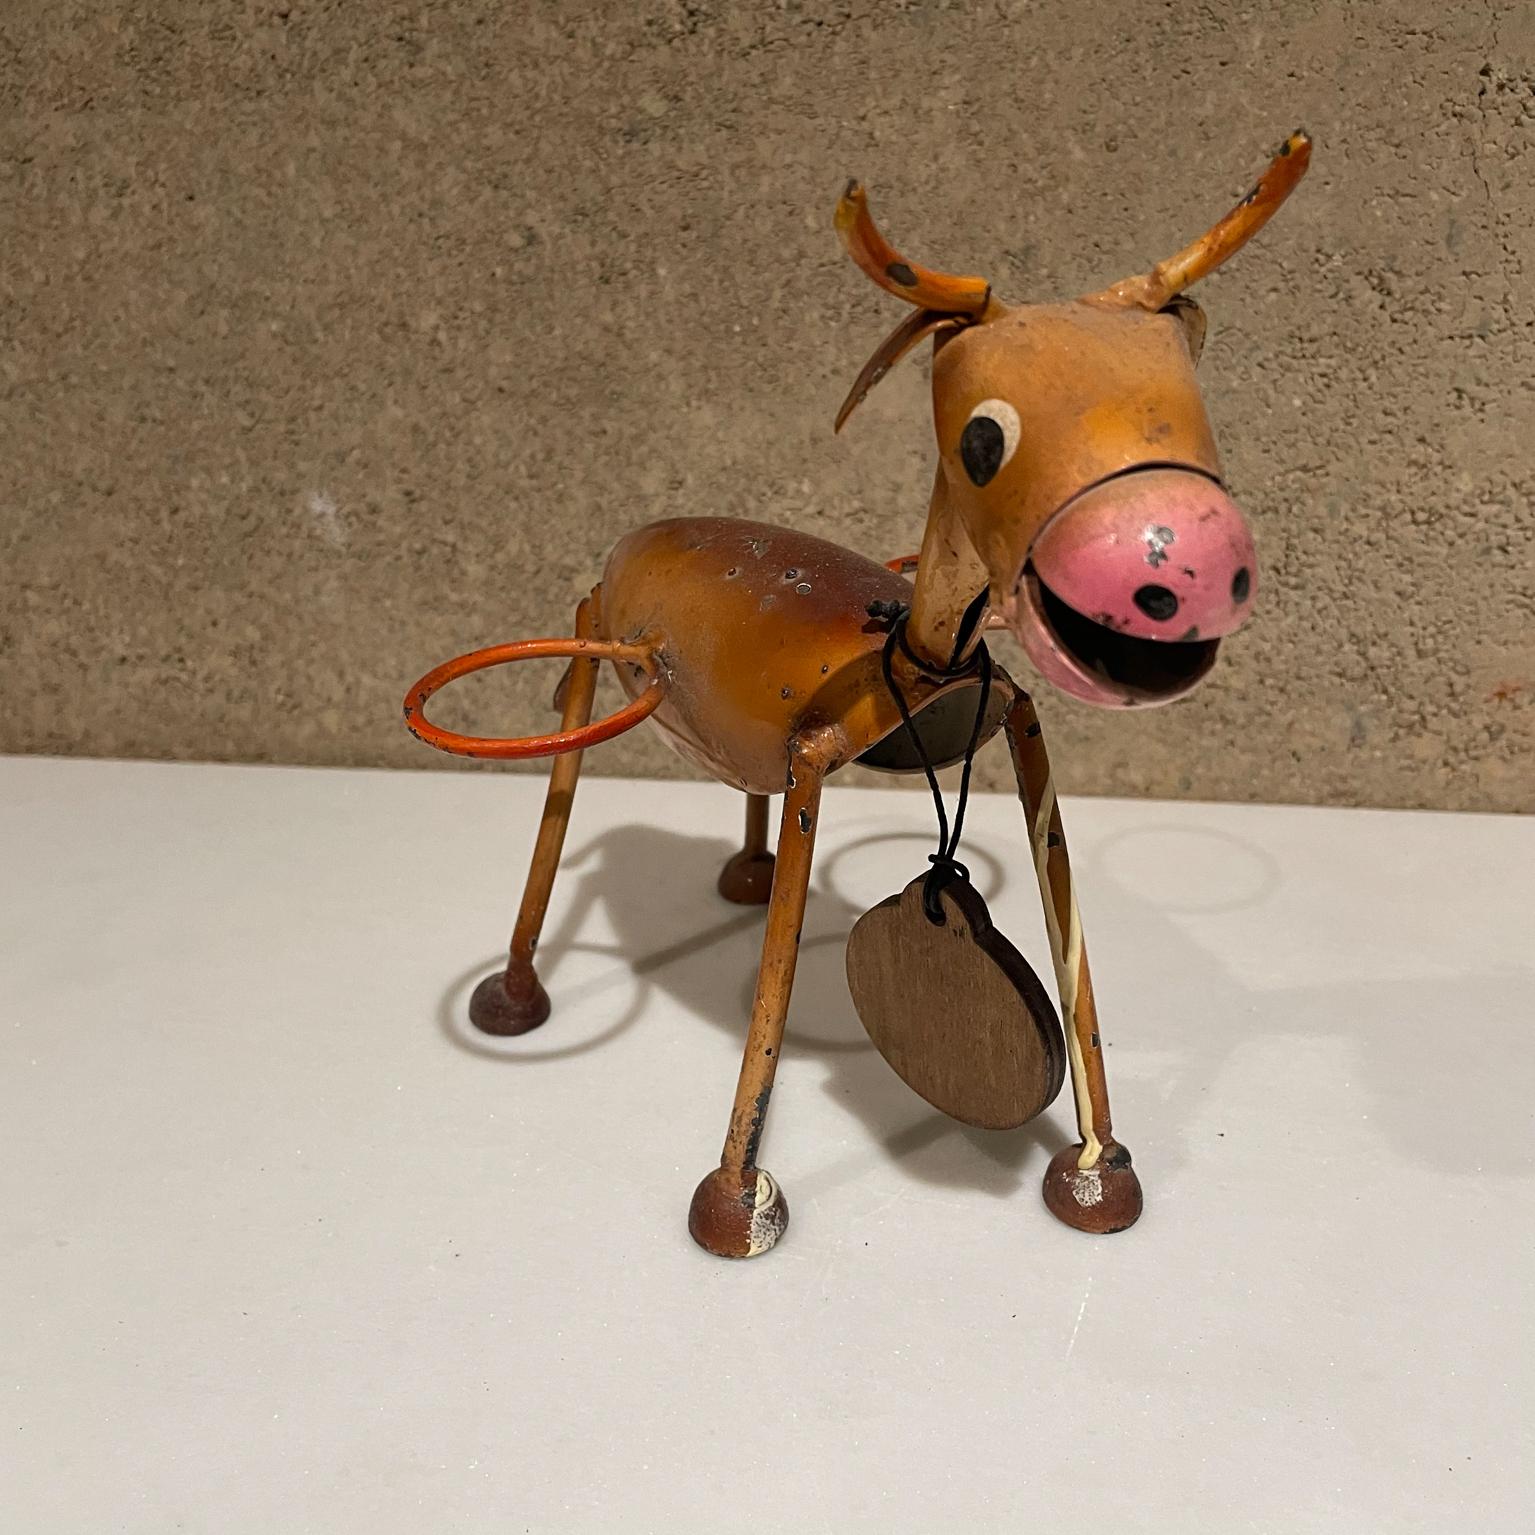 Donkey
1970s after Manuel Felguerez Modernist Handmade brown Donkey Valet Mexico
Metal painted adorable donkey valet with two rings for napkins or salt & pepper shakers!
Ideal napkin holder kitchen caddy miscellaneous storage.
Unmarked,